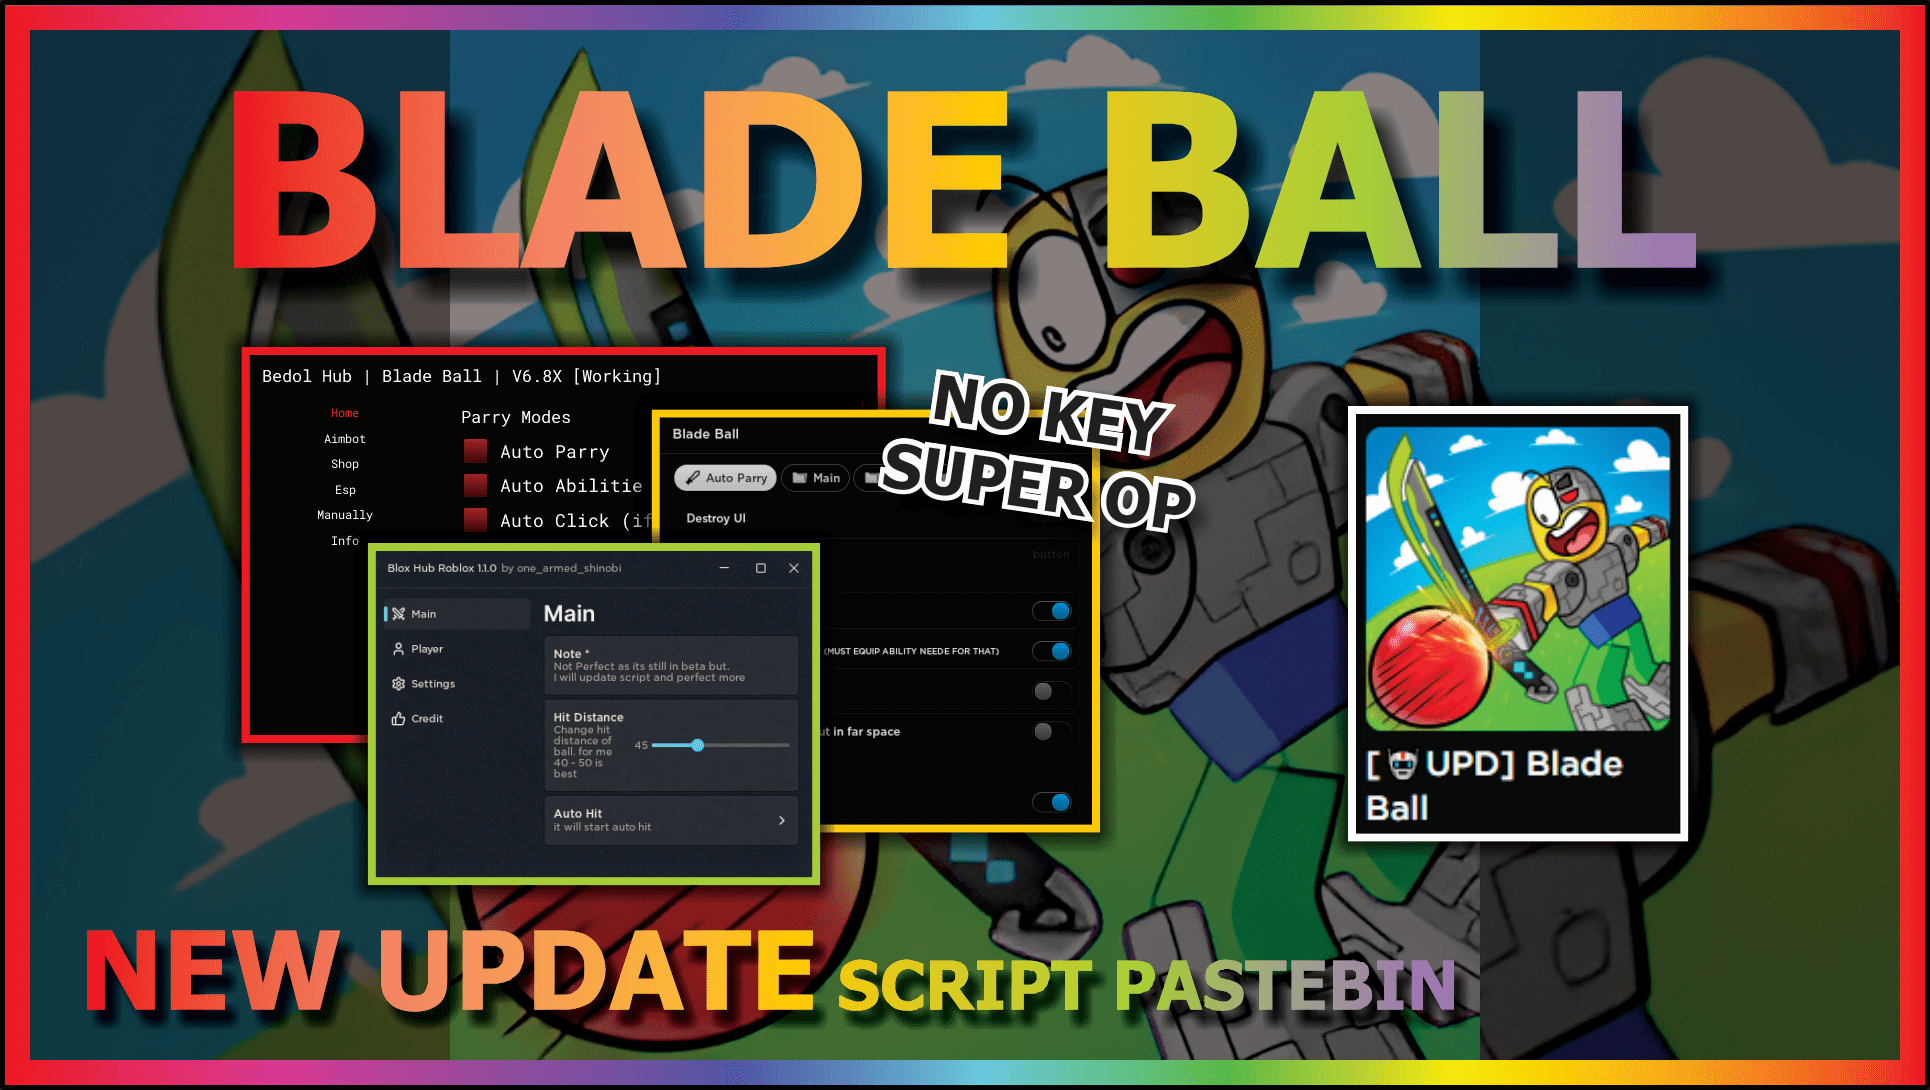 Auto Parry Blade Ball Script Download 100% Free